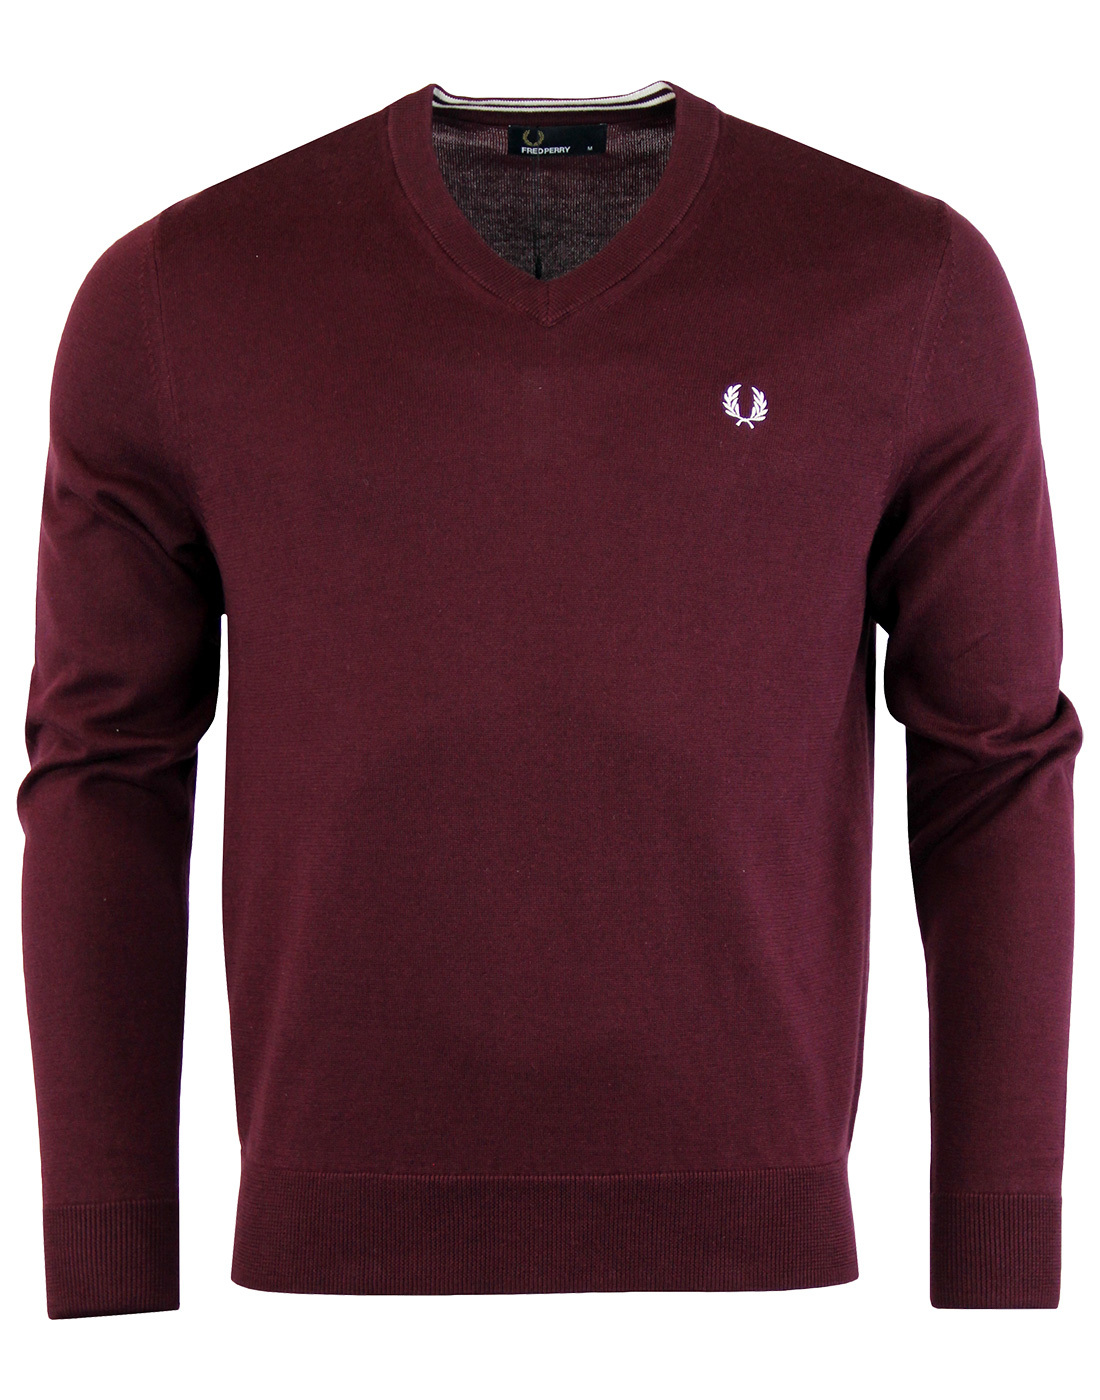 FRED PERRY Men's Classic Cotton V-Neck Sweater M